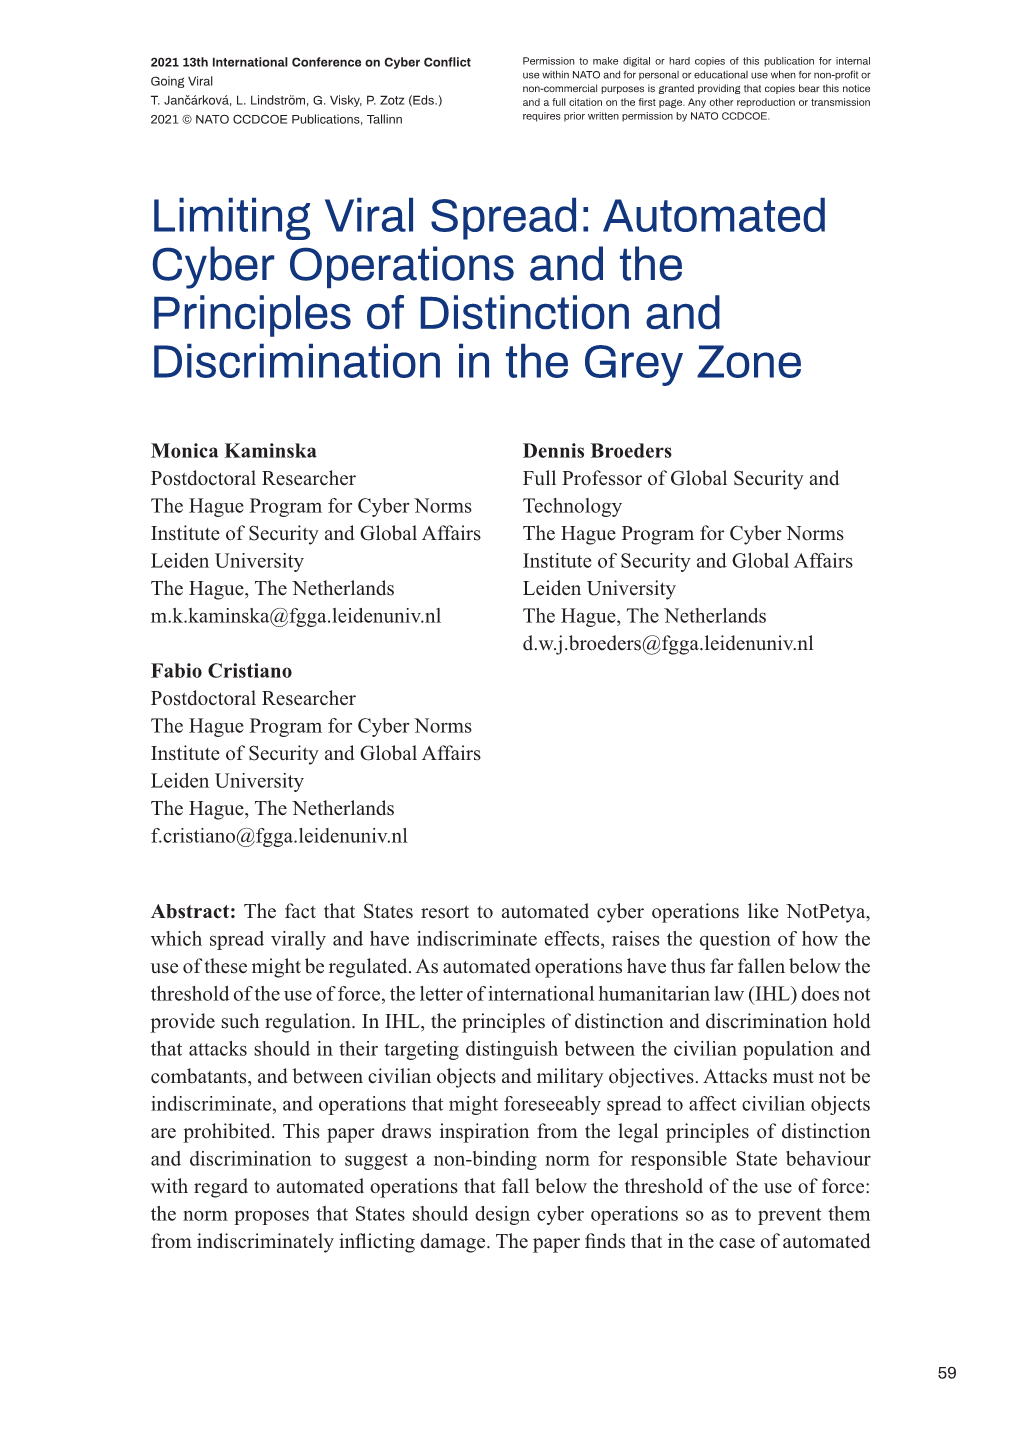 Limiting Viral Spread: Automated Cyber Operations and the Principles of Distinction and Discrimination in the Grey Zone